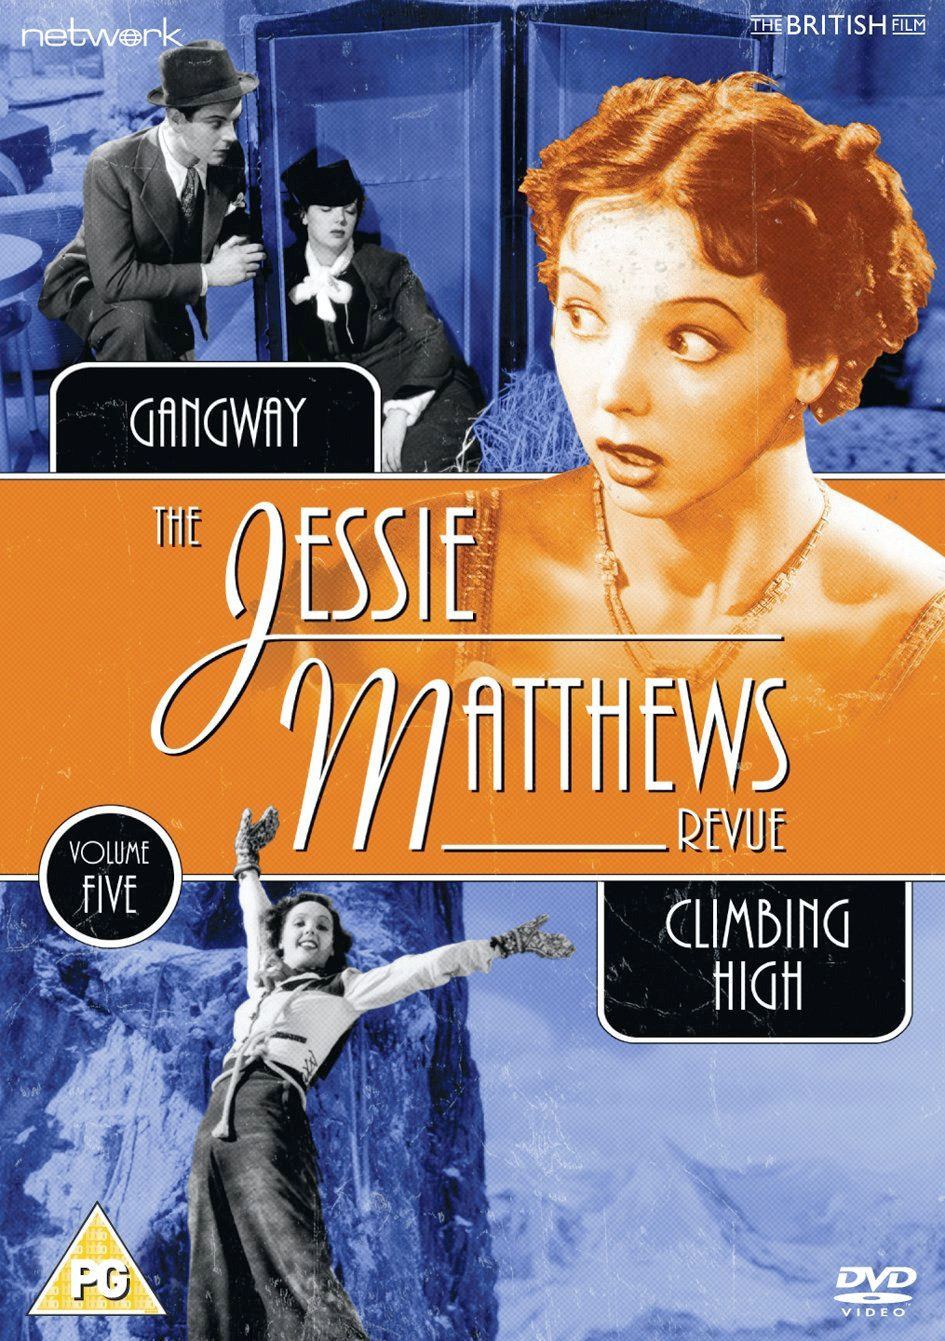 The Jessie Matthews Revue Volume 5 from Network and The British Film.  Features Gangway (1937) and Climbing High (1938)